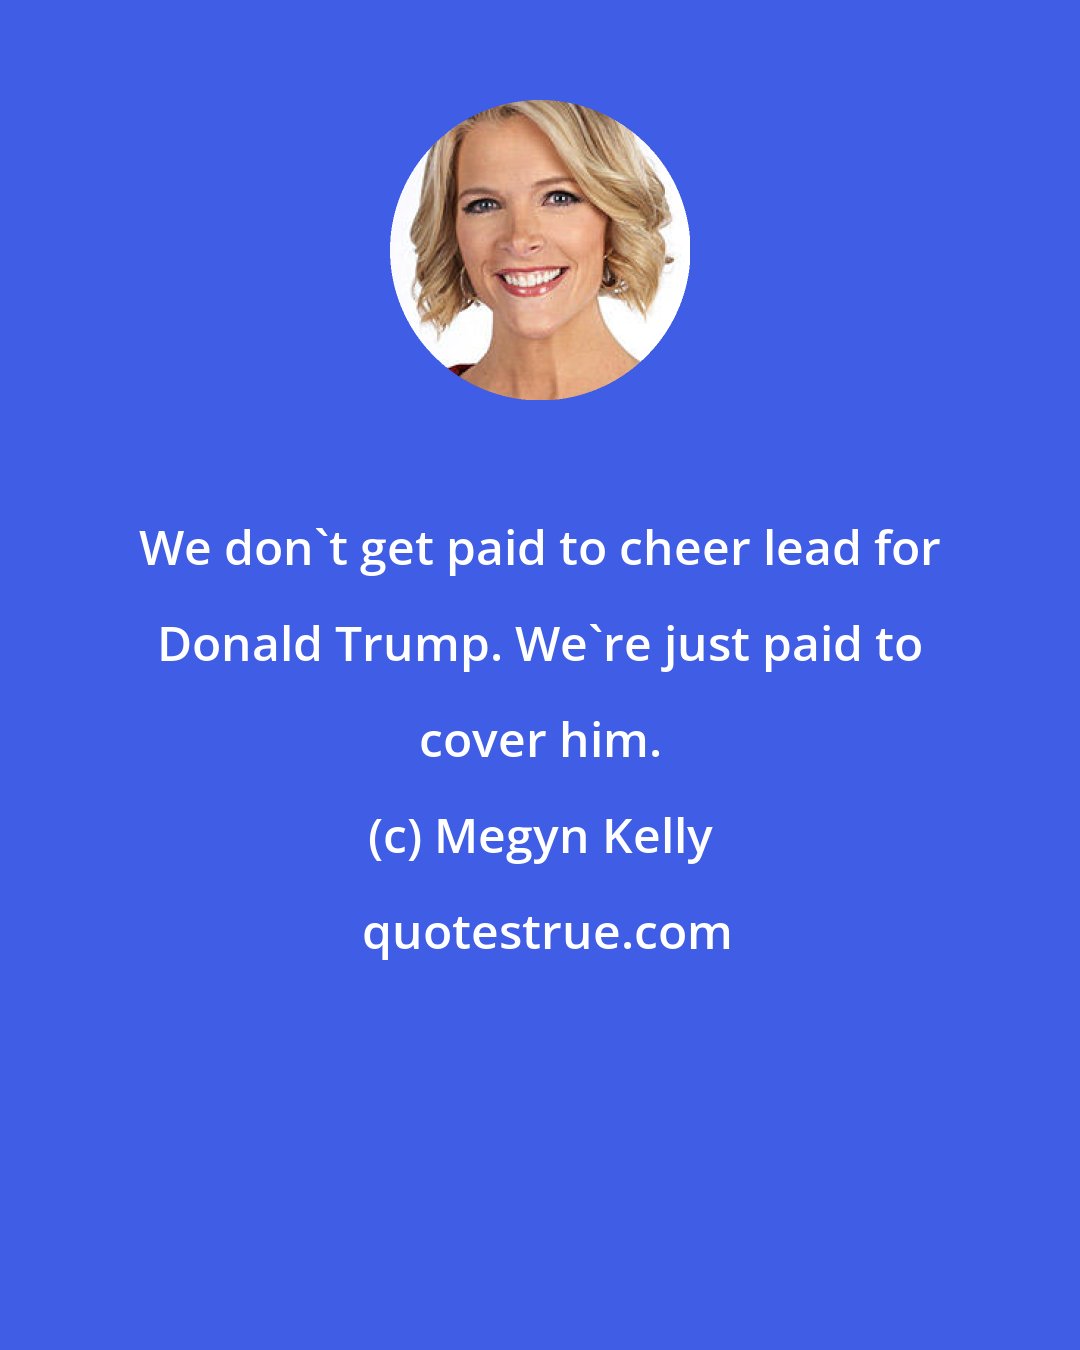 Megyn Kelly: We don't get paid to cheer lead for Donald Trump. We're just paid to cover him.